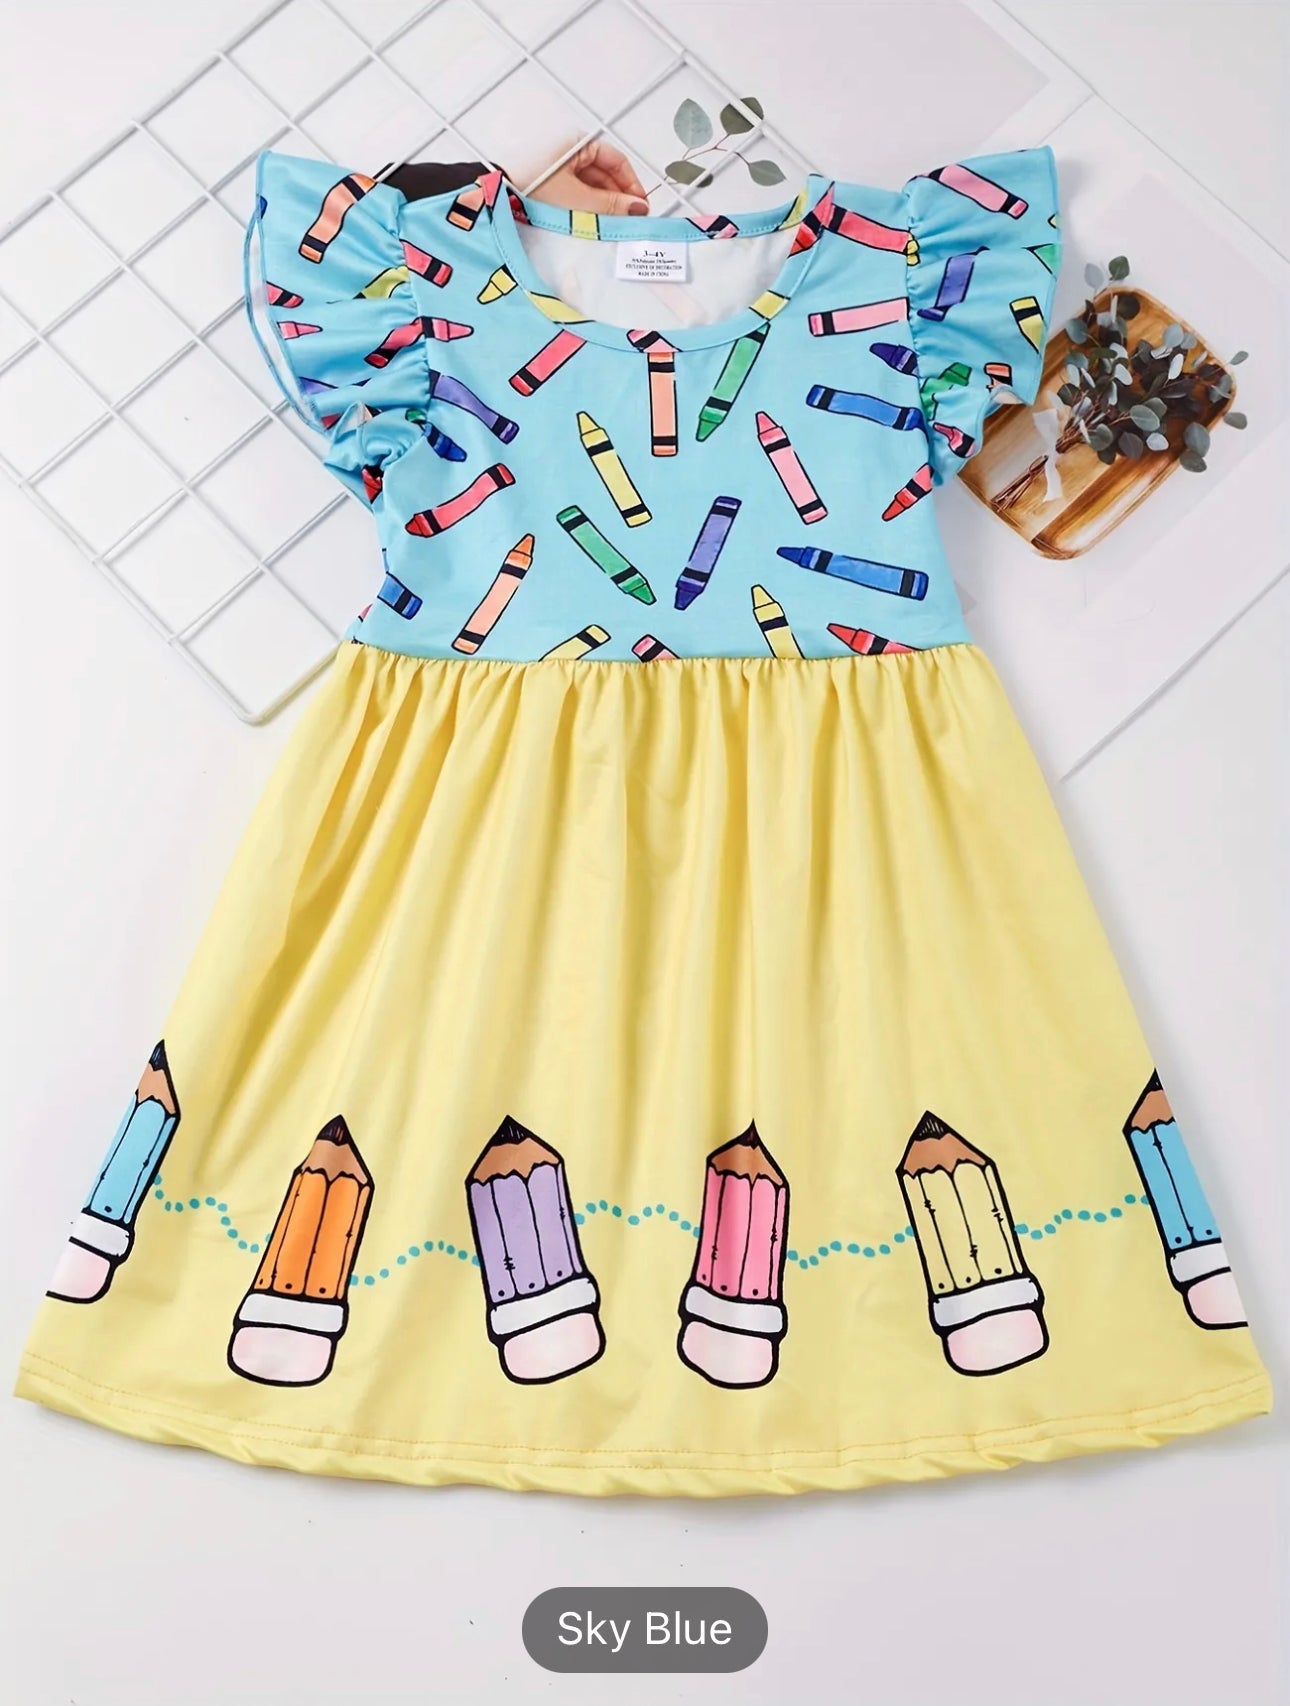 Toddler Girls Ruffle Trim Colorful Crayon Graphic Princess Dress For Back To School Season Party, Cute Kids Summer Clothes